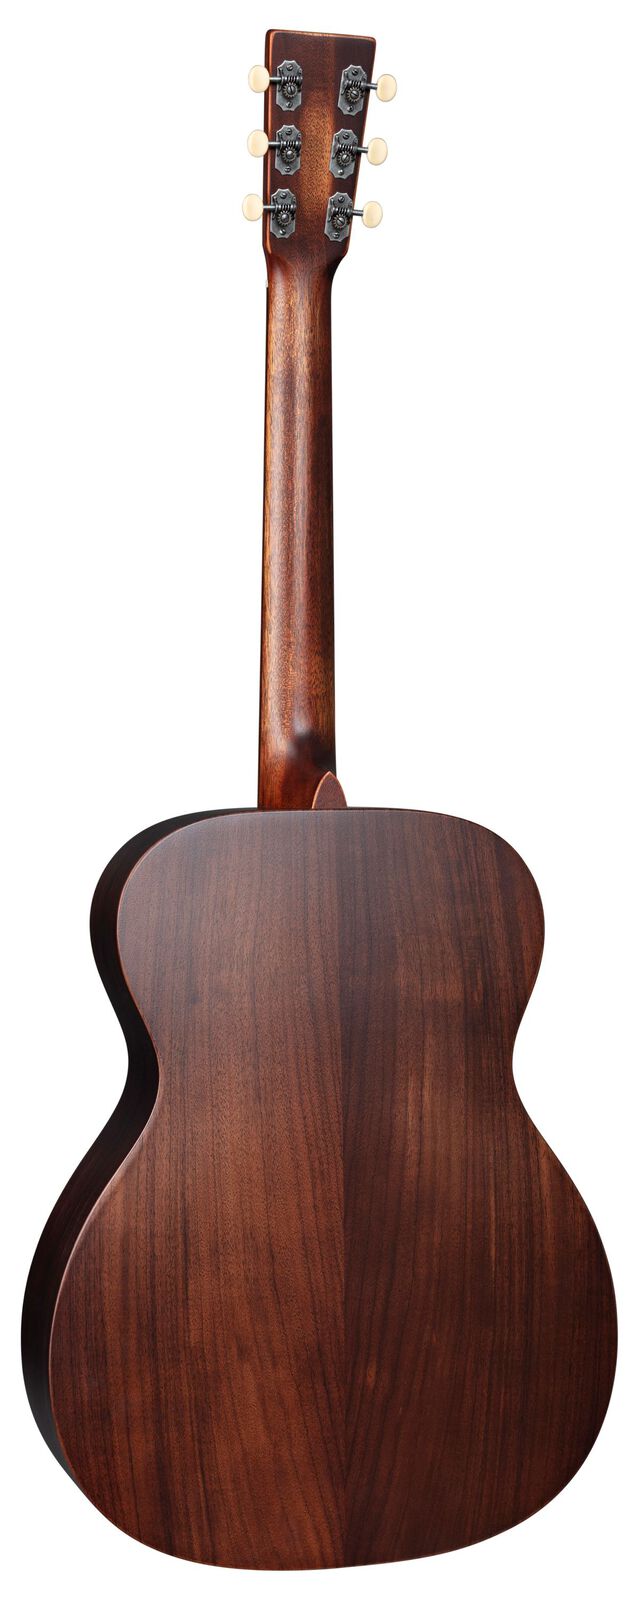 Martin & Co 000-16 StreetMaster - Spruce/Rosewood